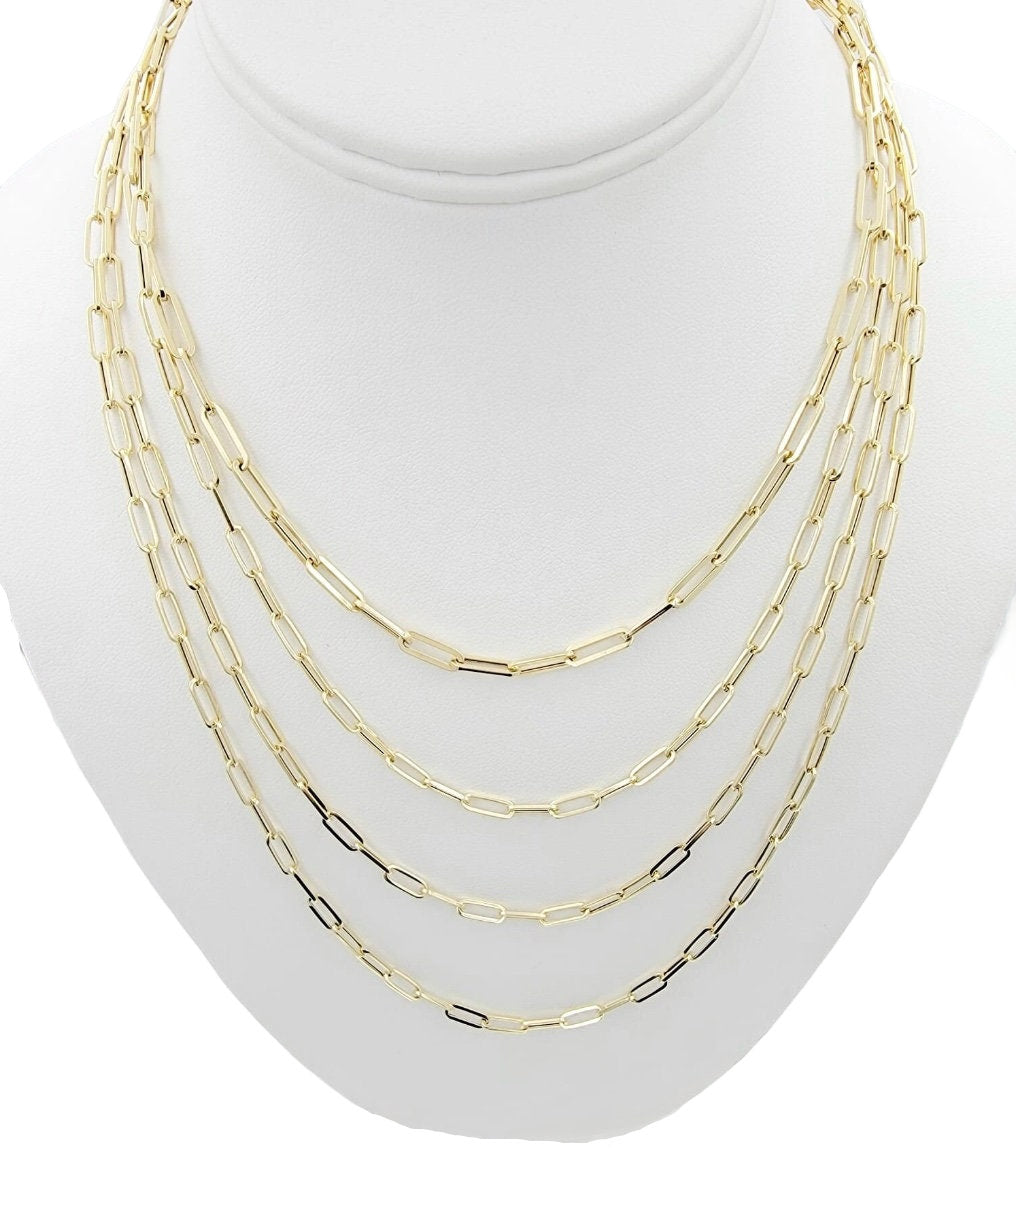 Ladys 14k Paperclip Chain Necklace, 16 Inch Solid Yellow Gold Gift for Her